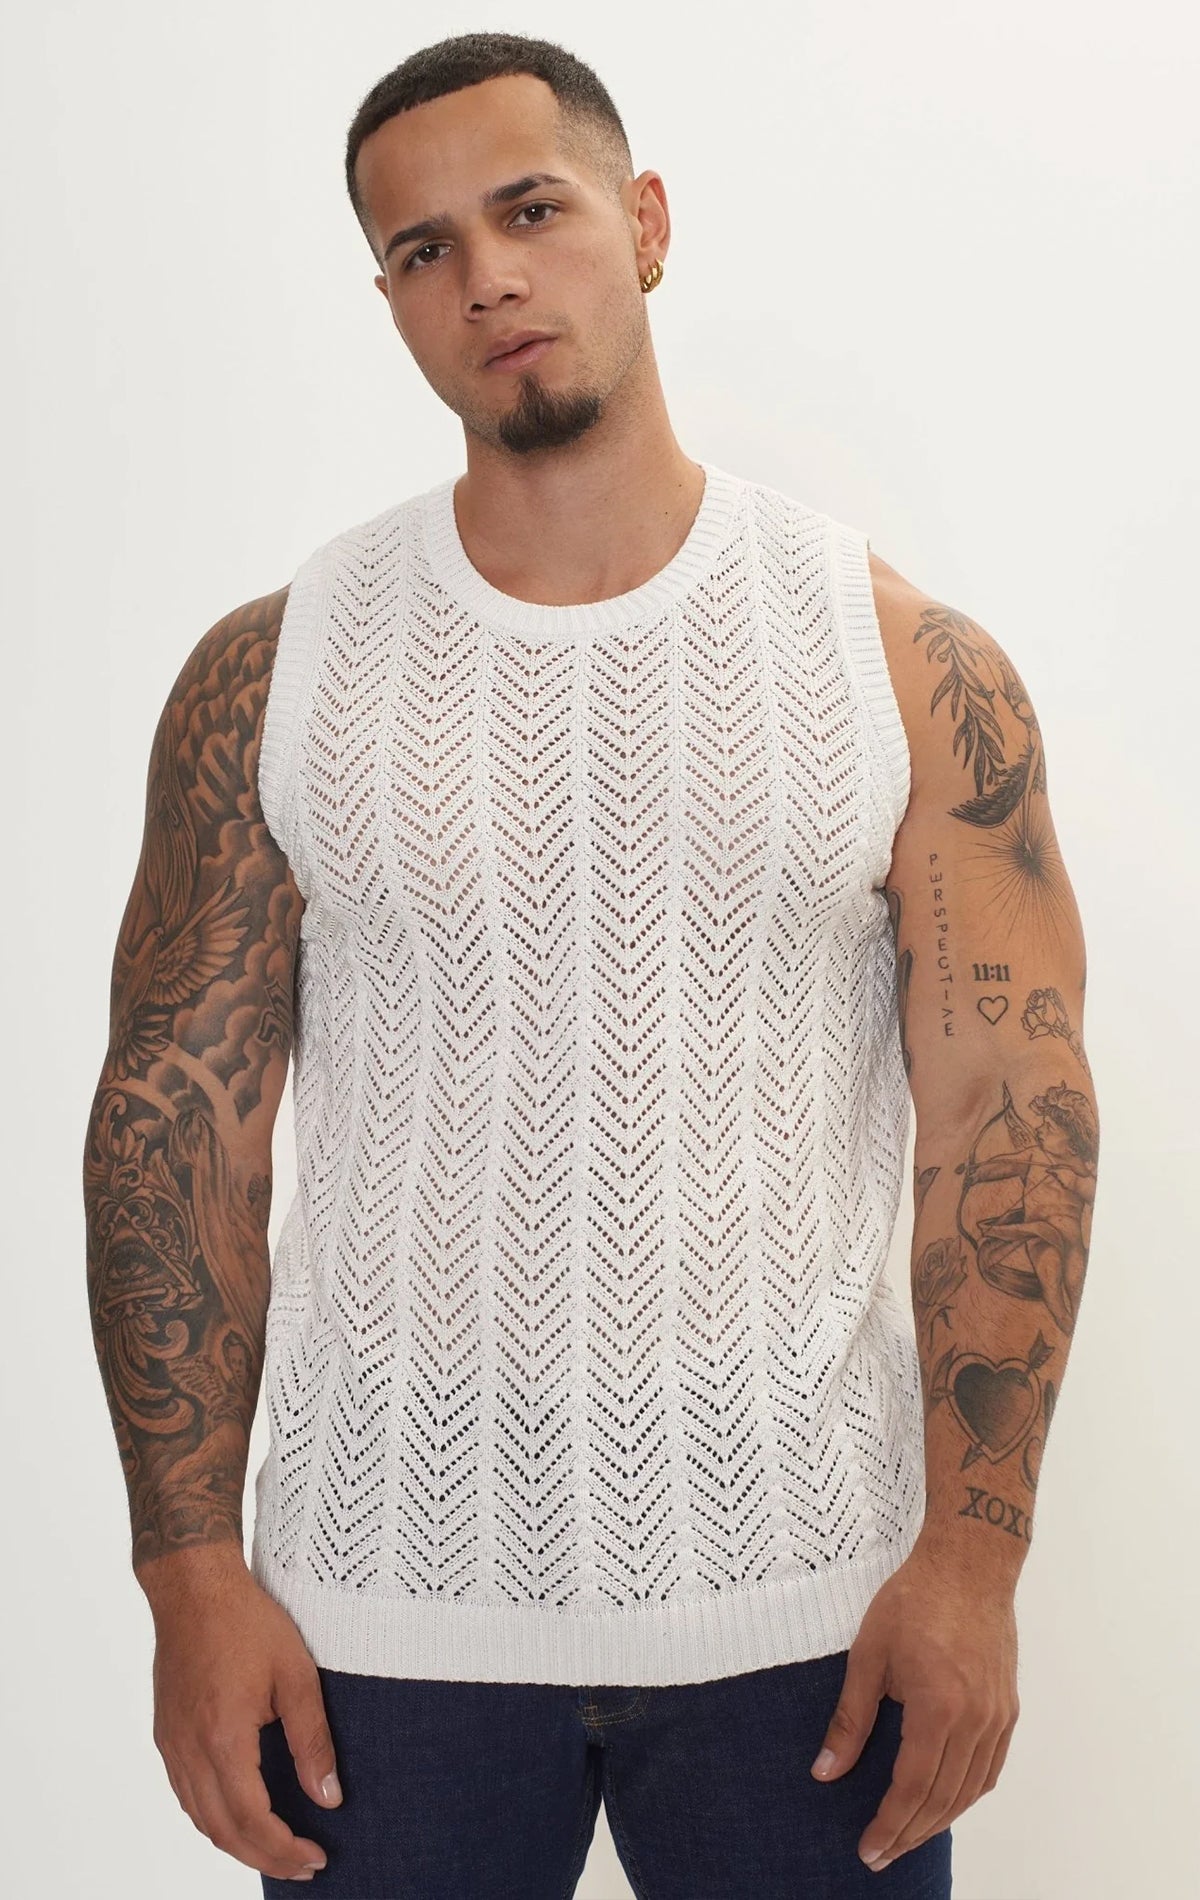 Men's knit muscle fit tank top in off white. The tank top is made from a 50% cotton, 50% acrylic blend and features a muscle fit cut, sleeveless construction, and a textured knit fabric.